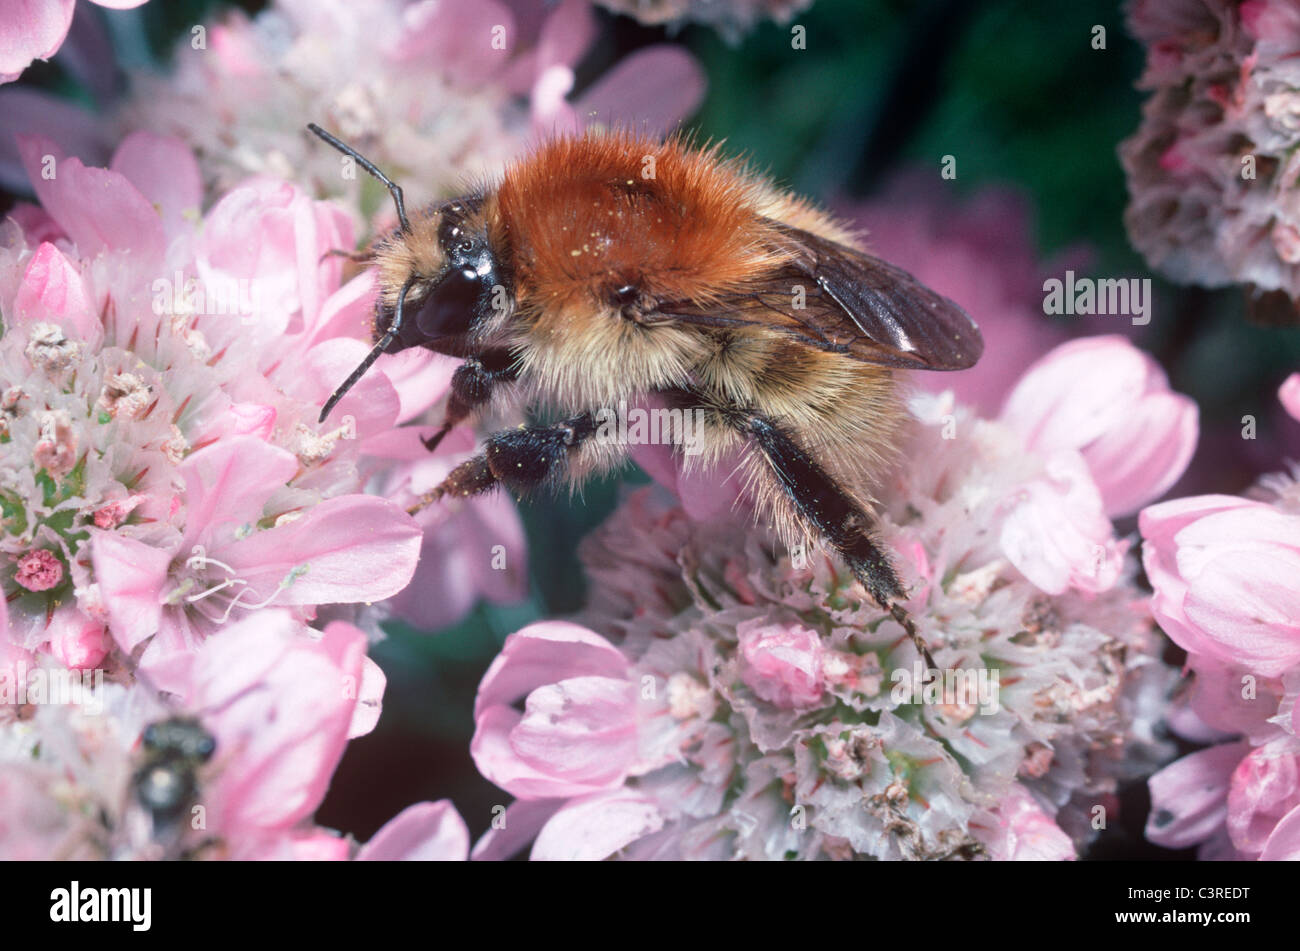 Brown-banded carder bumble bee (Bombus humilis: Apidae) overwintered queen foraging on thrift, UK Stock Photo